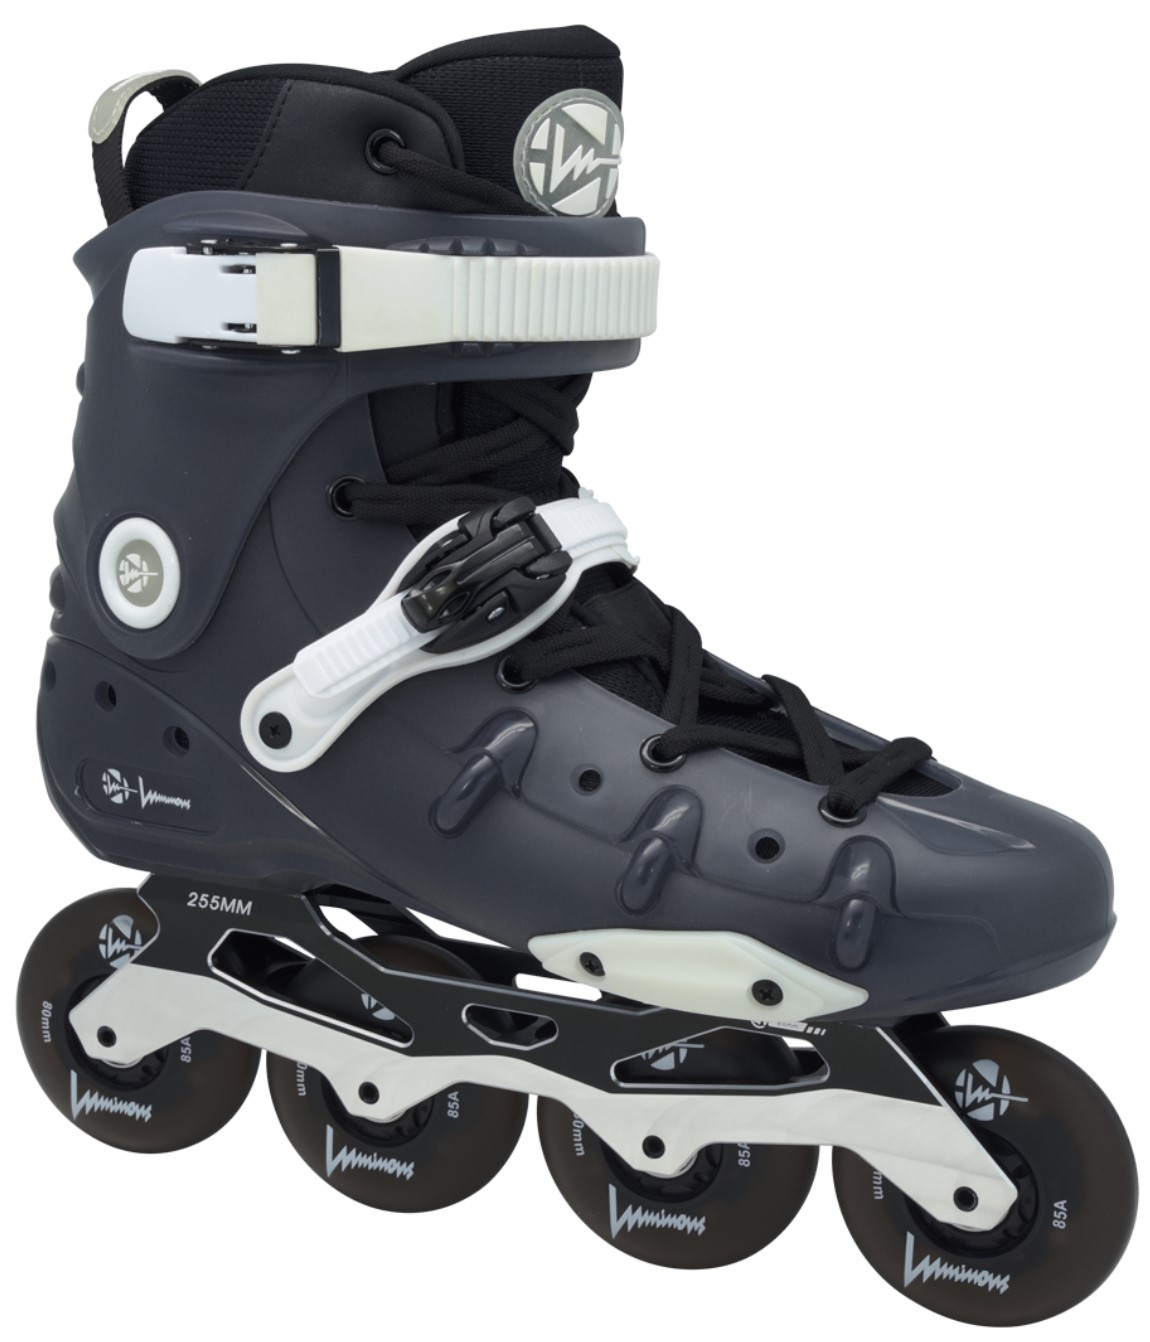 Luminous Ray 80 Dark inline skate with 4 Luminous wheels of 80 mm and glowing parts on the inline skate